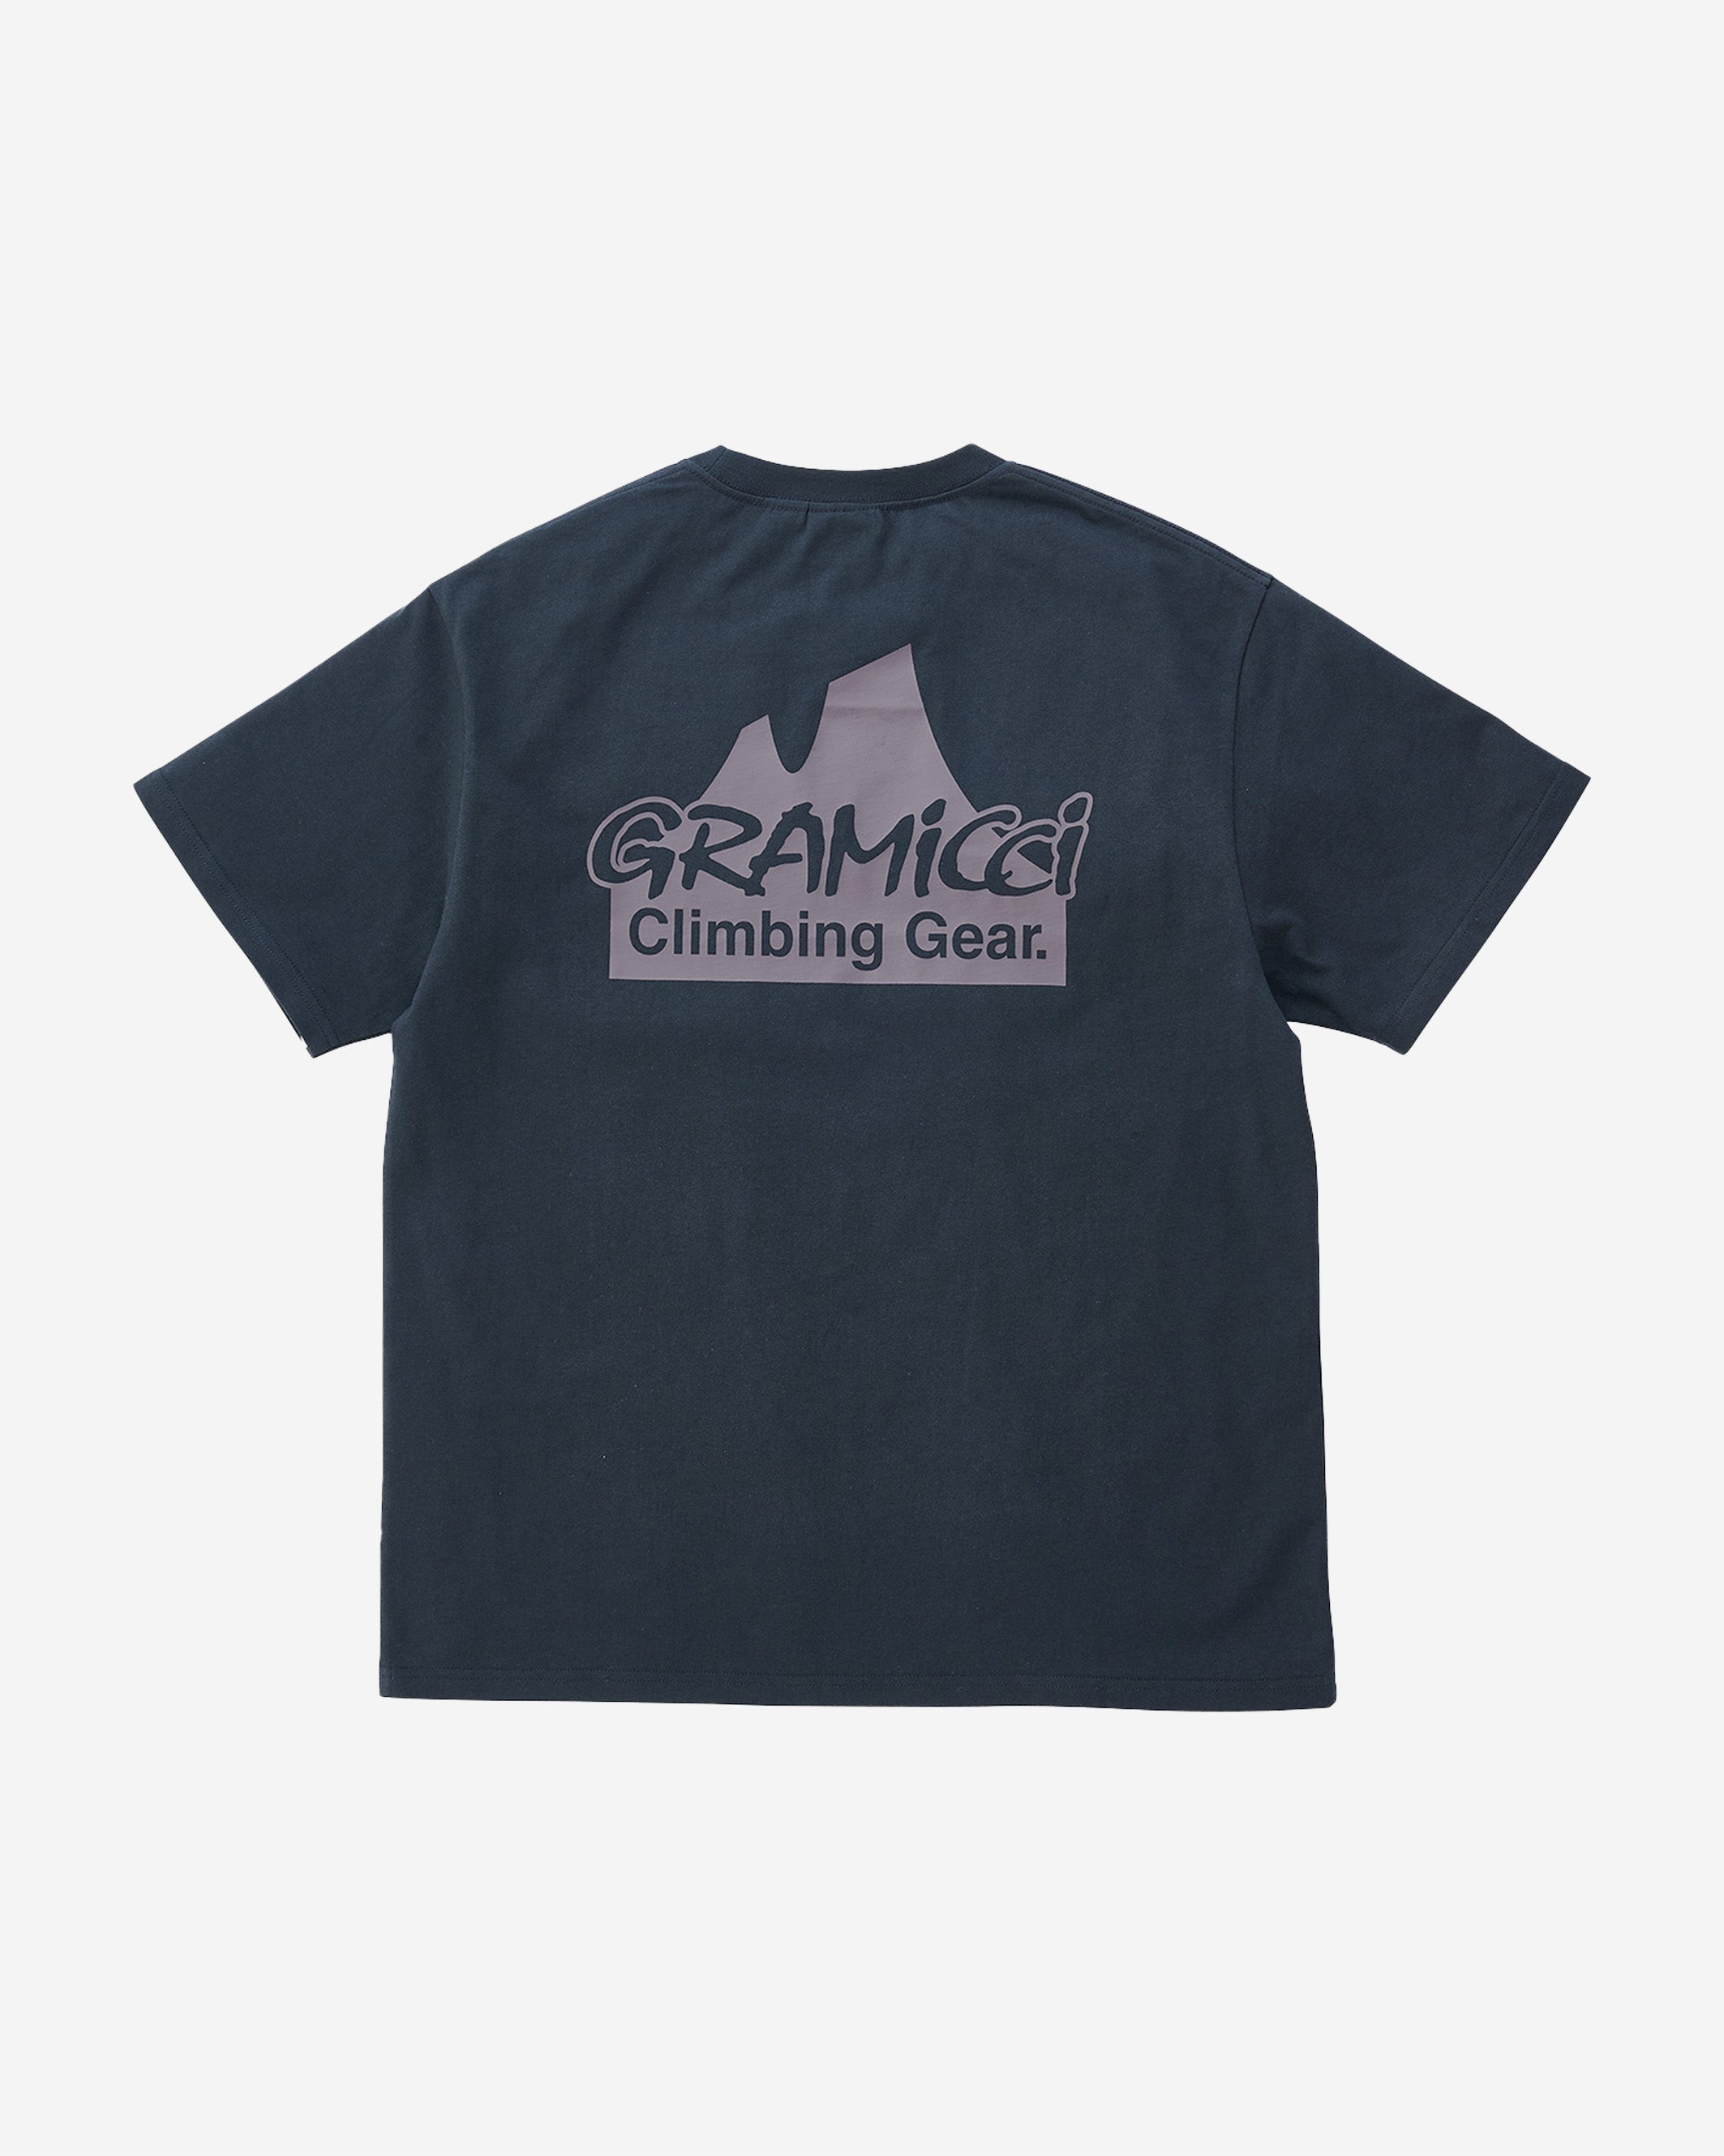 The Climbing Gear Tee is made of dry-touch organic cotton that is soft and comfortable for outdoor activities or everyday wear. This t-shirt features a print of the silhouette of a mountain with the words "Climbing Gear" and the Gramicci logo.